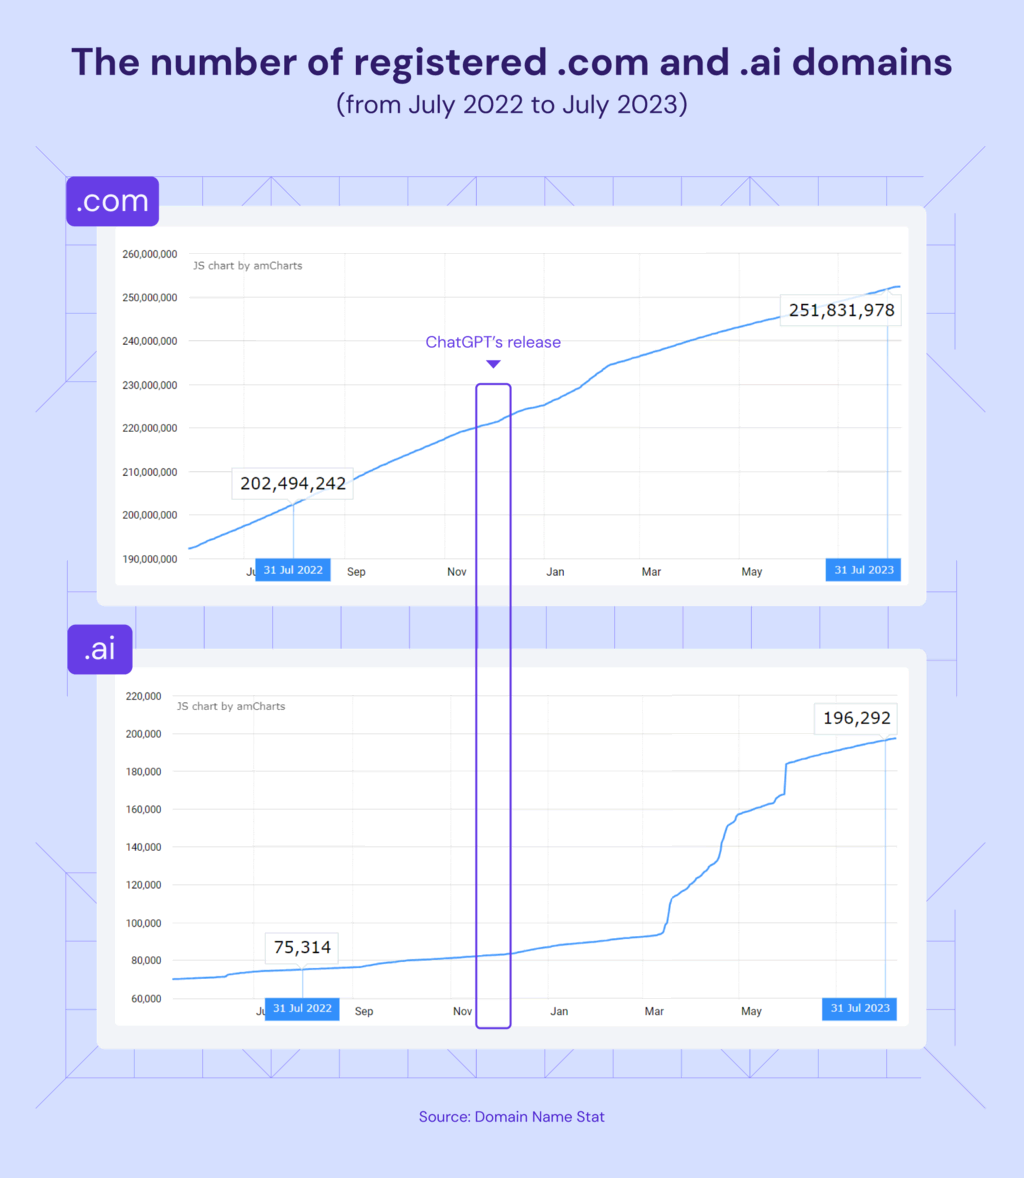 A custom graph that shows Domain Name Stat data, comparing the growth of .ai and .com domain registrations